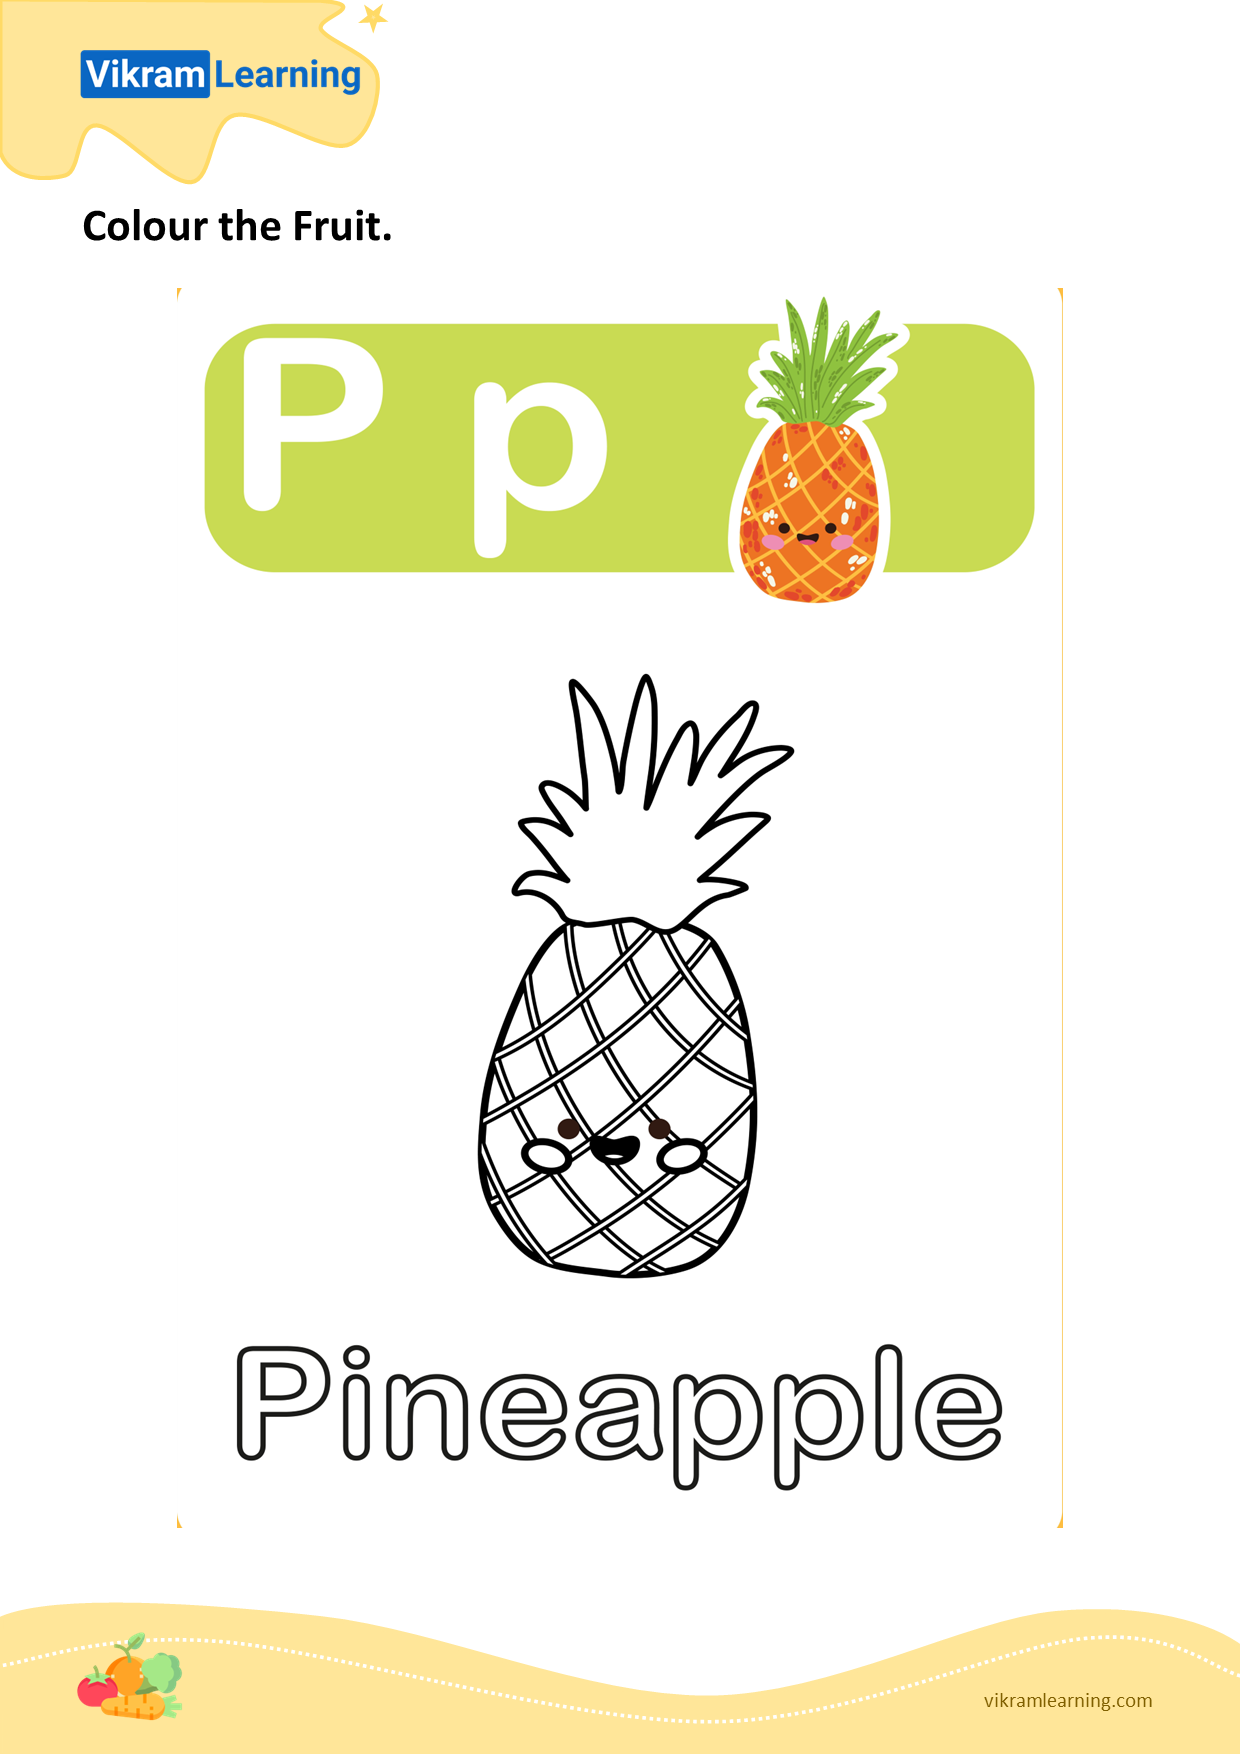 Download colour the fruit - pineapple worksheets